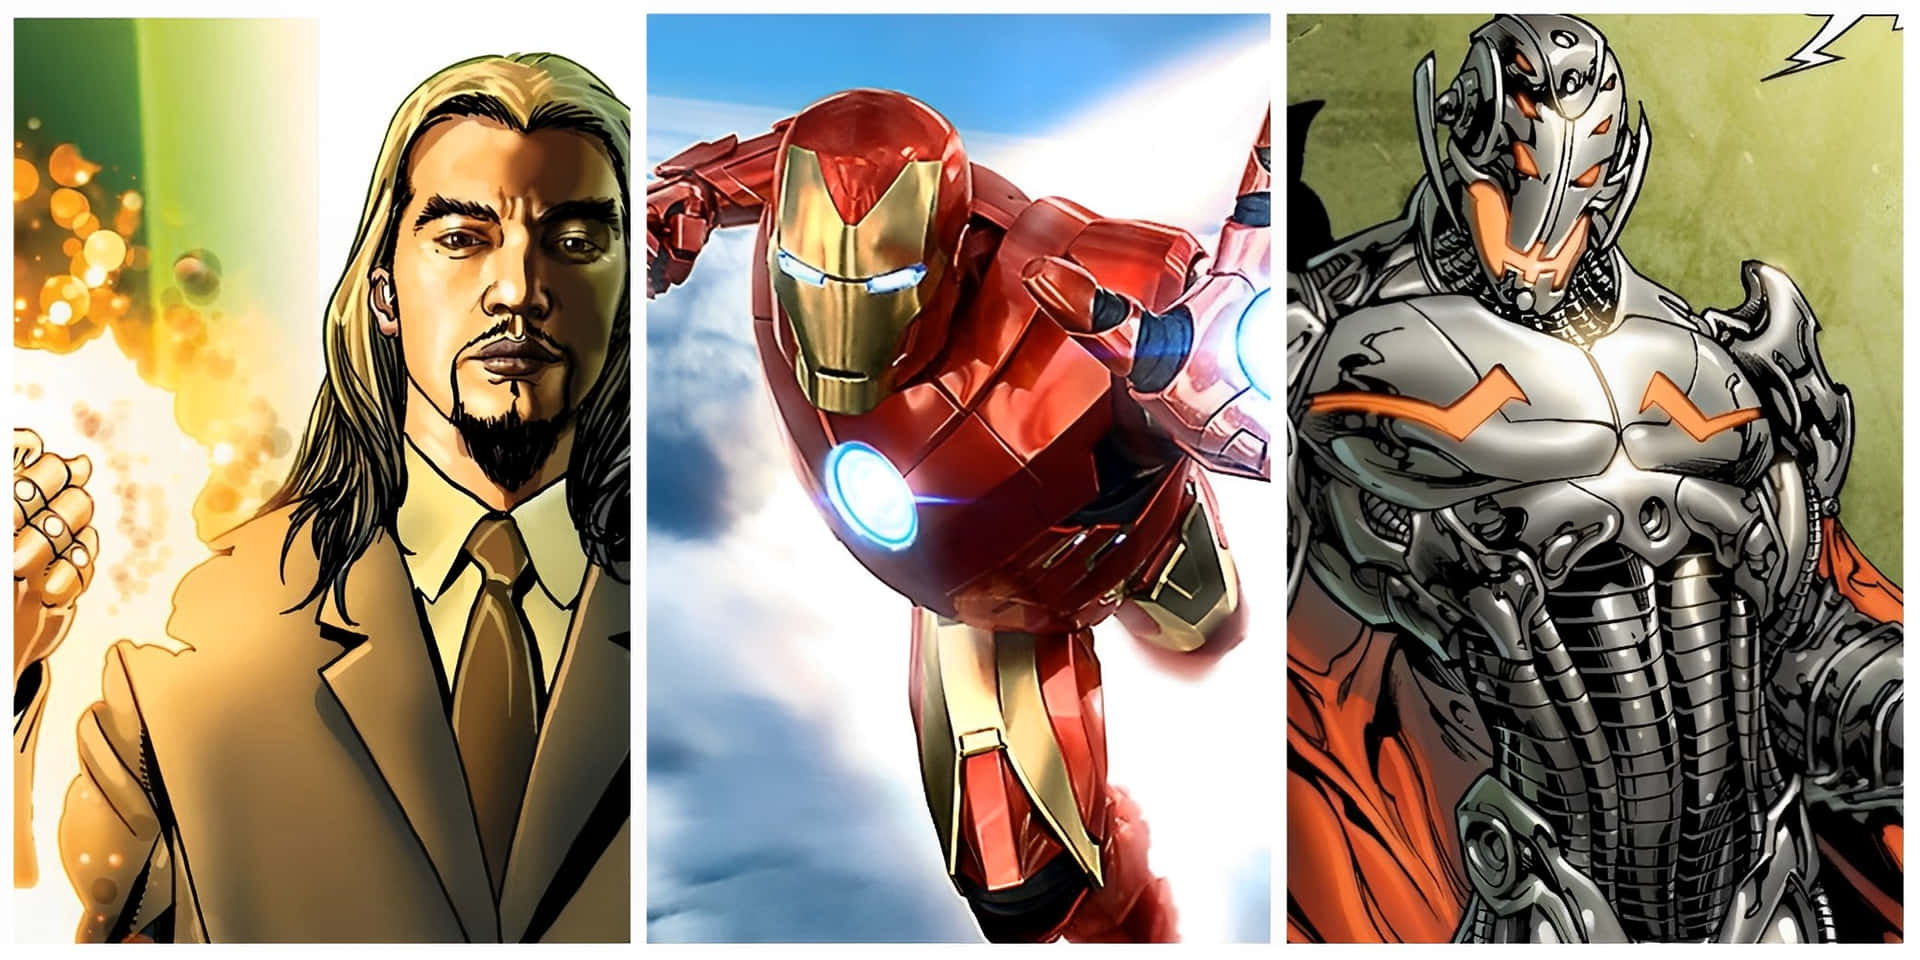 After taking on Tony Stark, these formidable Iron Man Villains have come together to assert dominance. Wallpaper